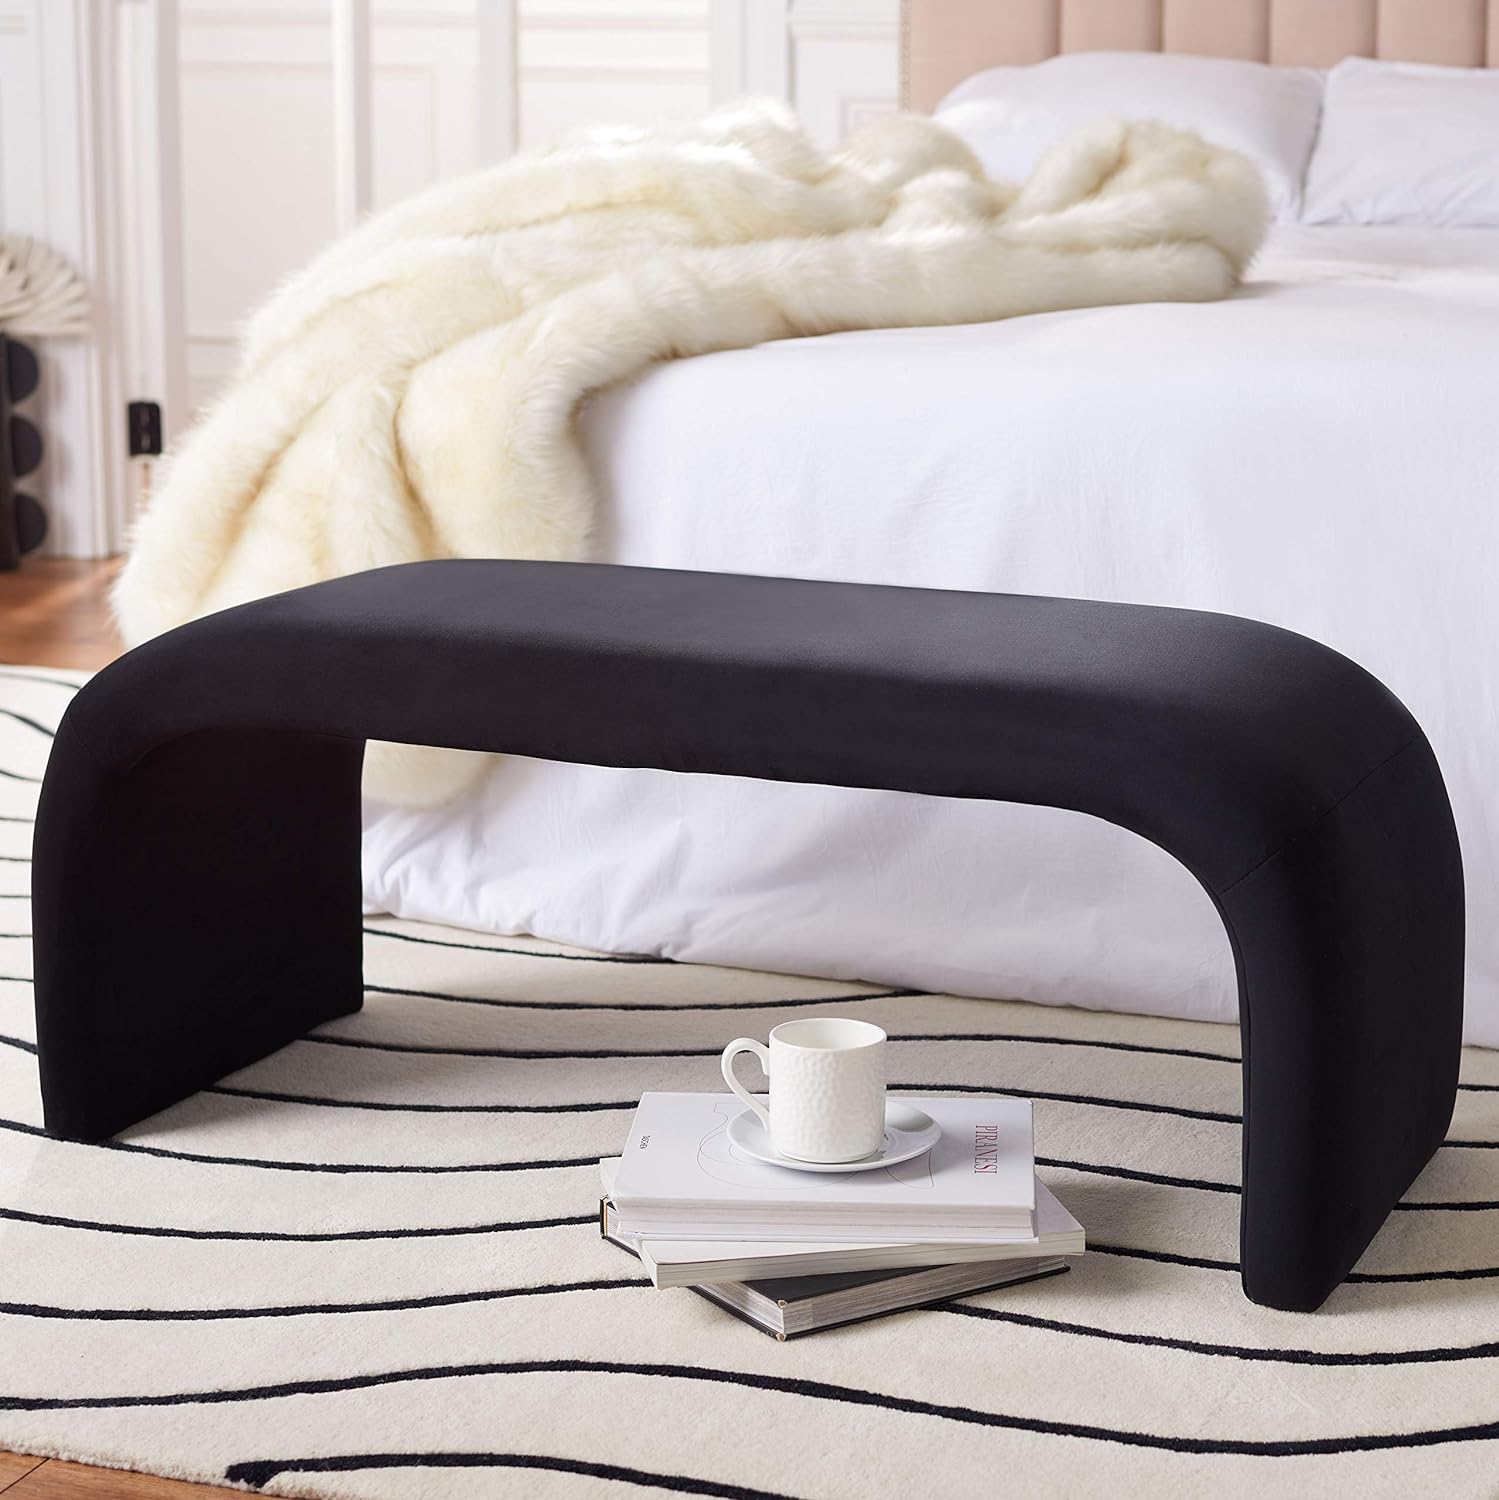 I was looking for a bench that could double as a coffee table, and this fit the bill. It arrived as a single piece, so just unbox and go!Its very soft, sturdy, and comfortable and is a simple, clean design. Color is true to picture. Highly recommend.